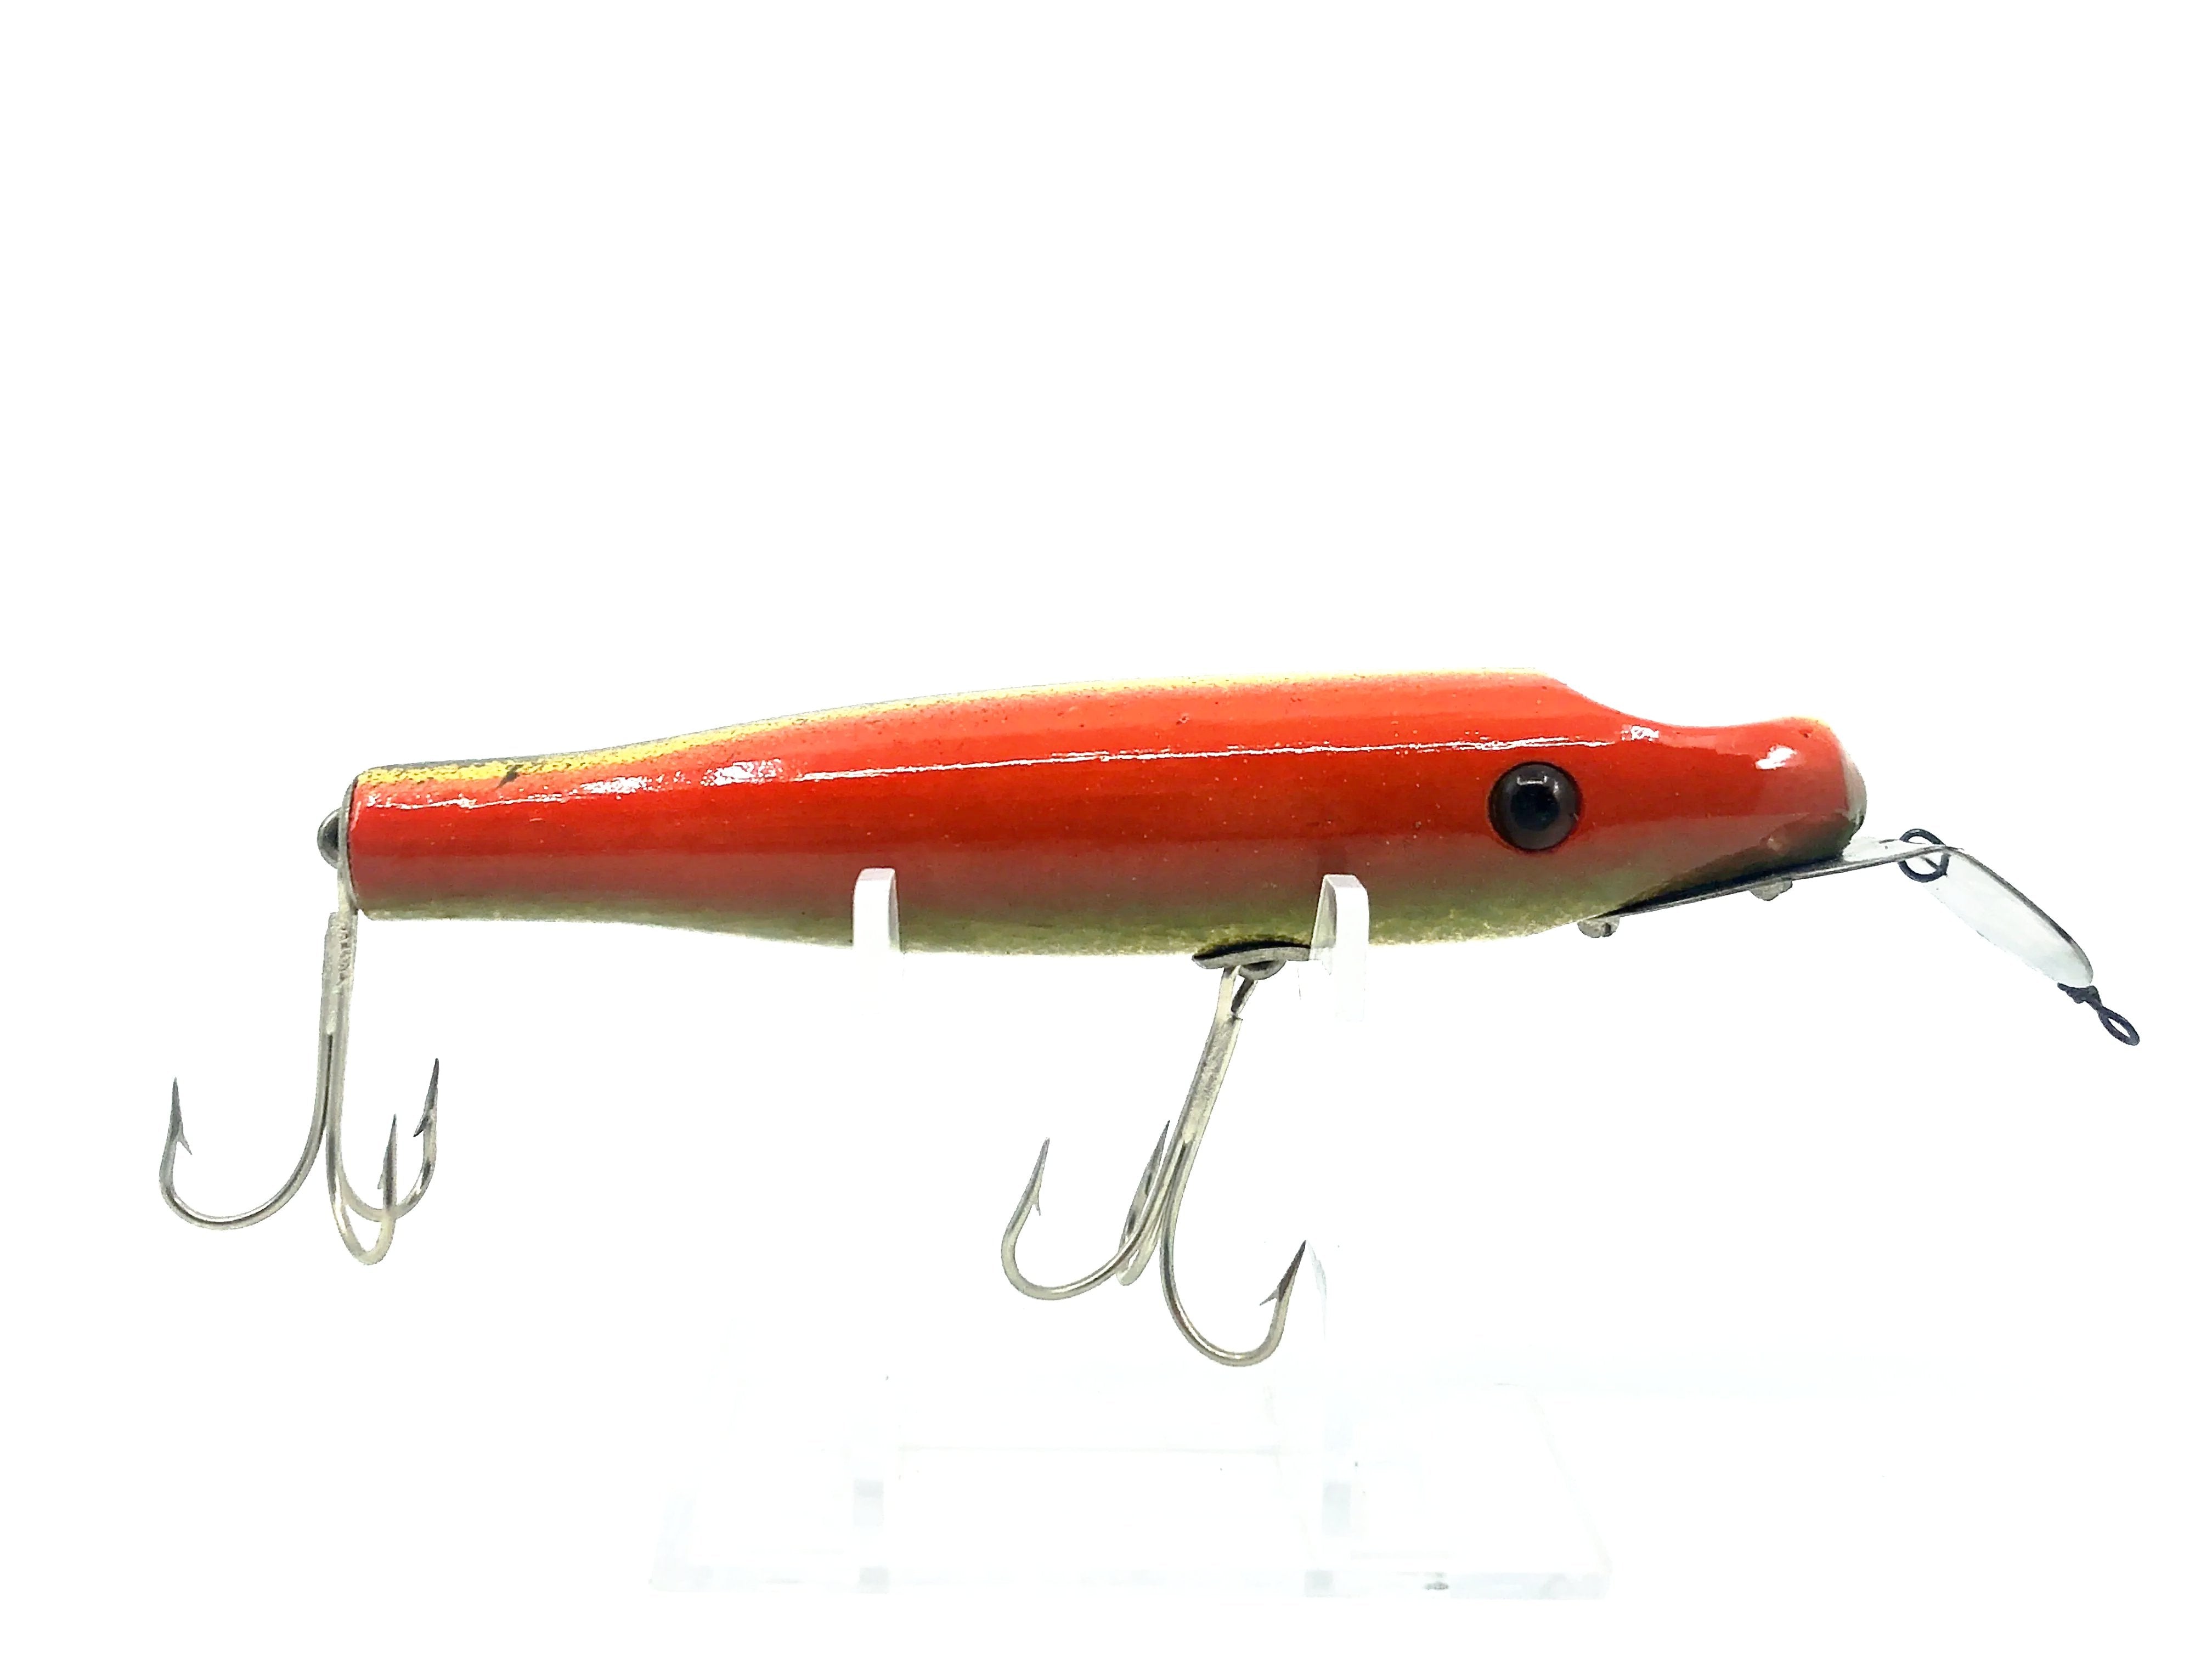 South Bend / Best-O-Luck #930 Pike Lure, Repainted Orange/Gold